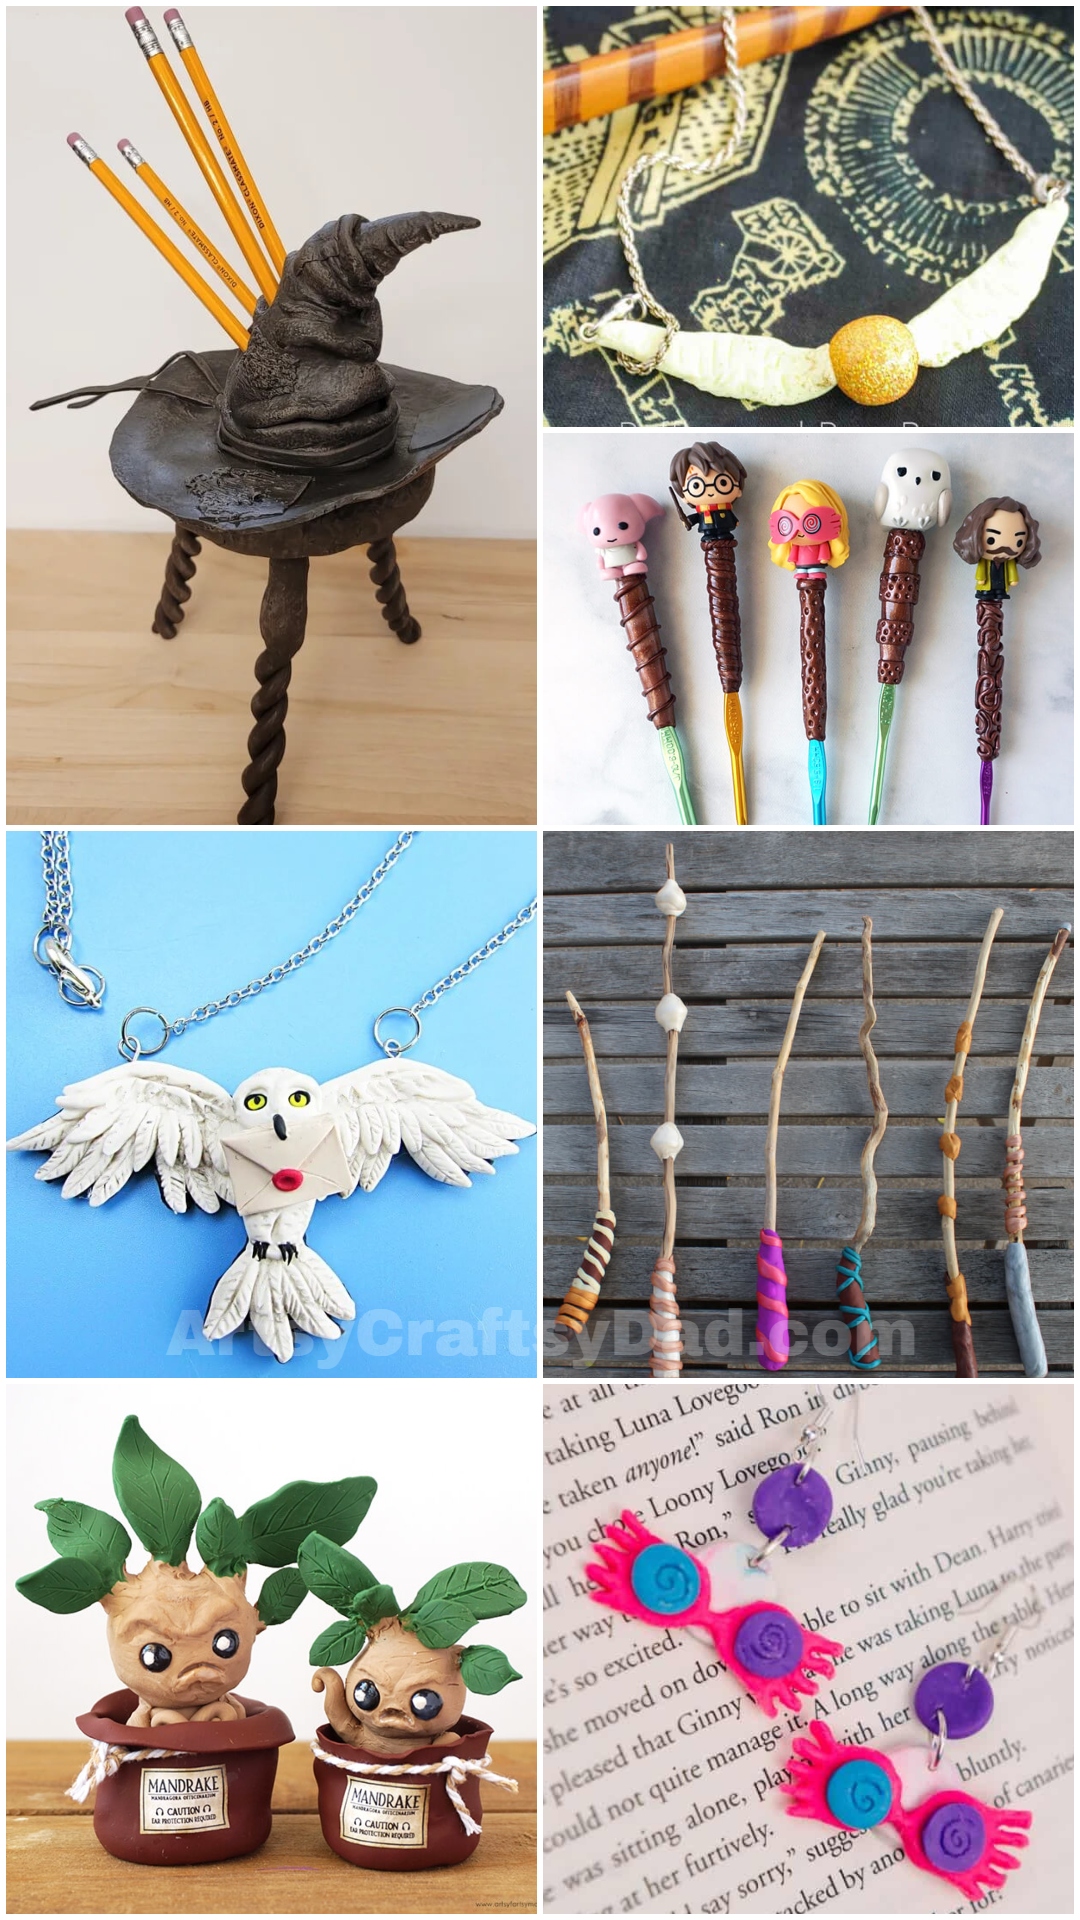 5 Harry Potter Crafts for Kids - The Melrose Family